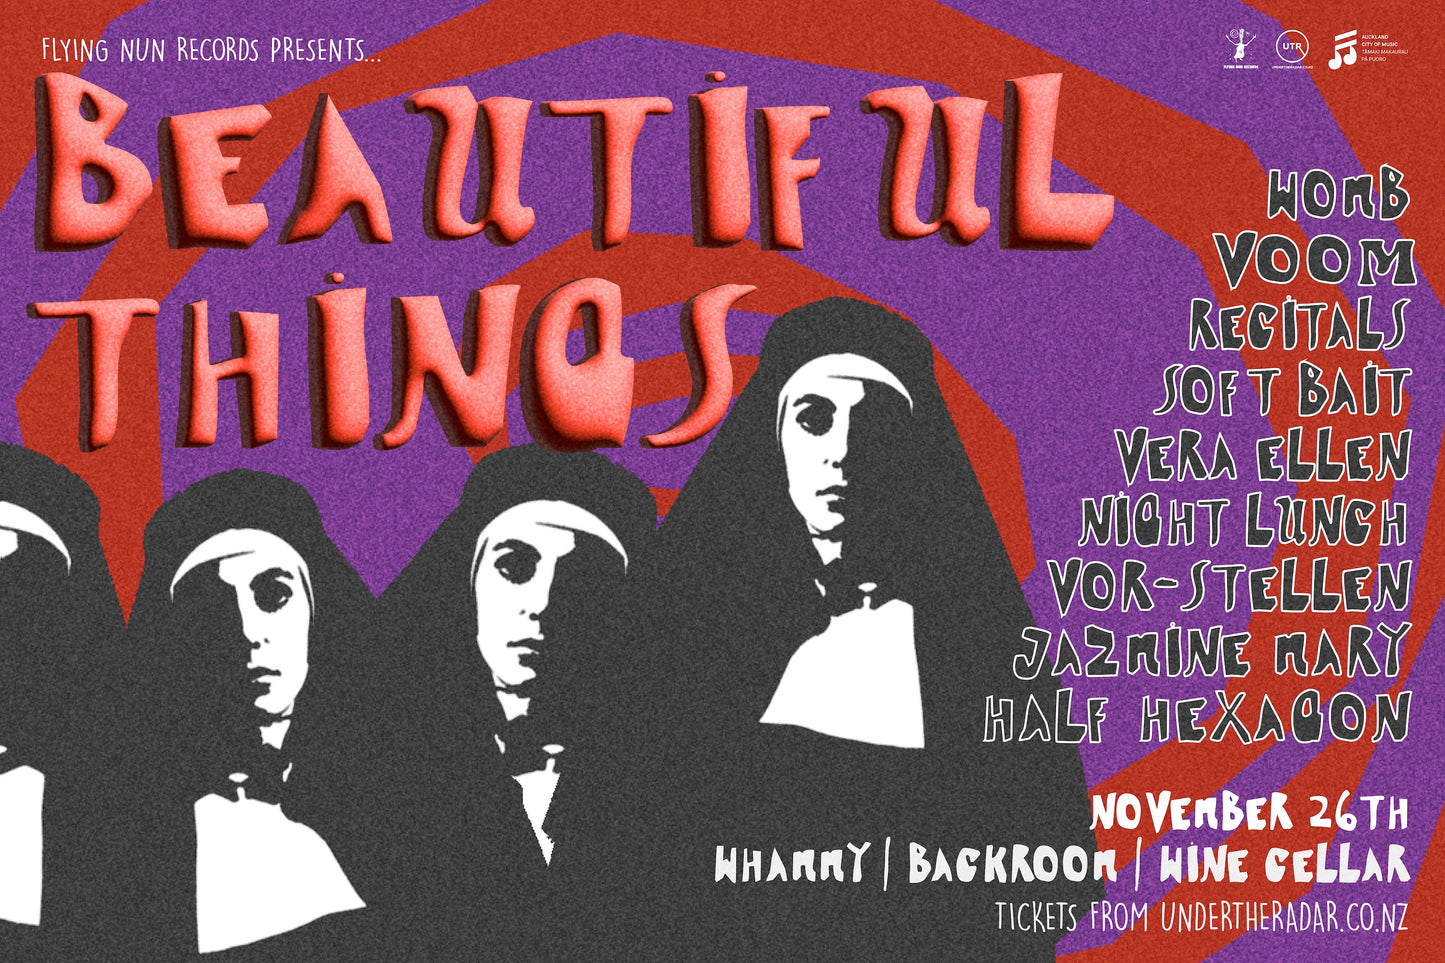 FLYING NUN PRESENTS: 'BEAUTIFUL THINGS' [AUCKLAND]